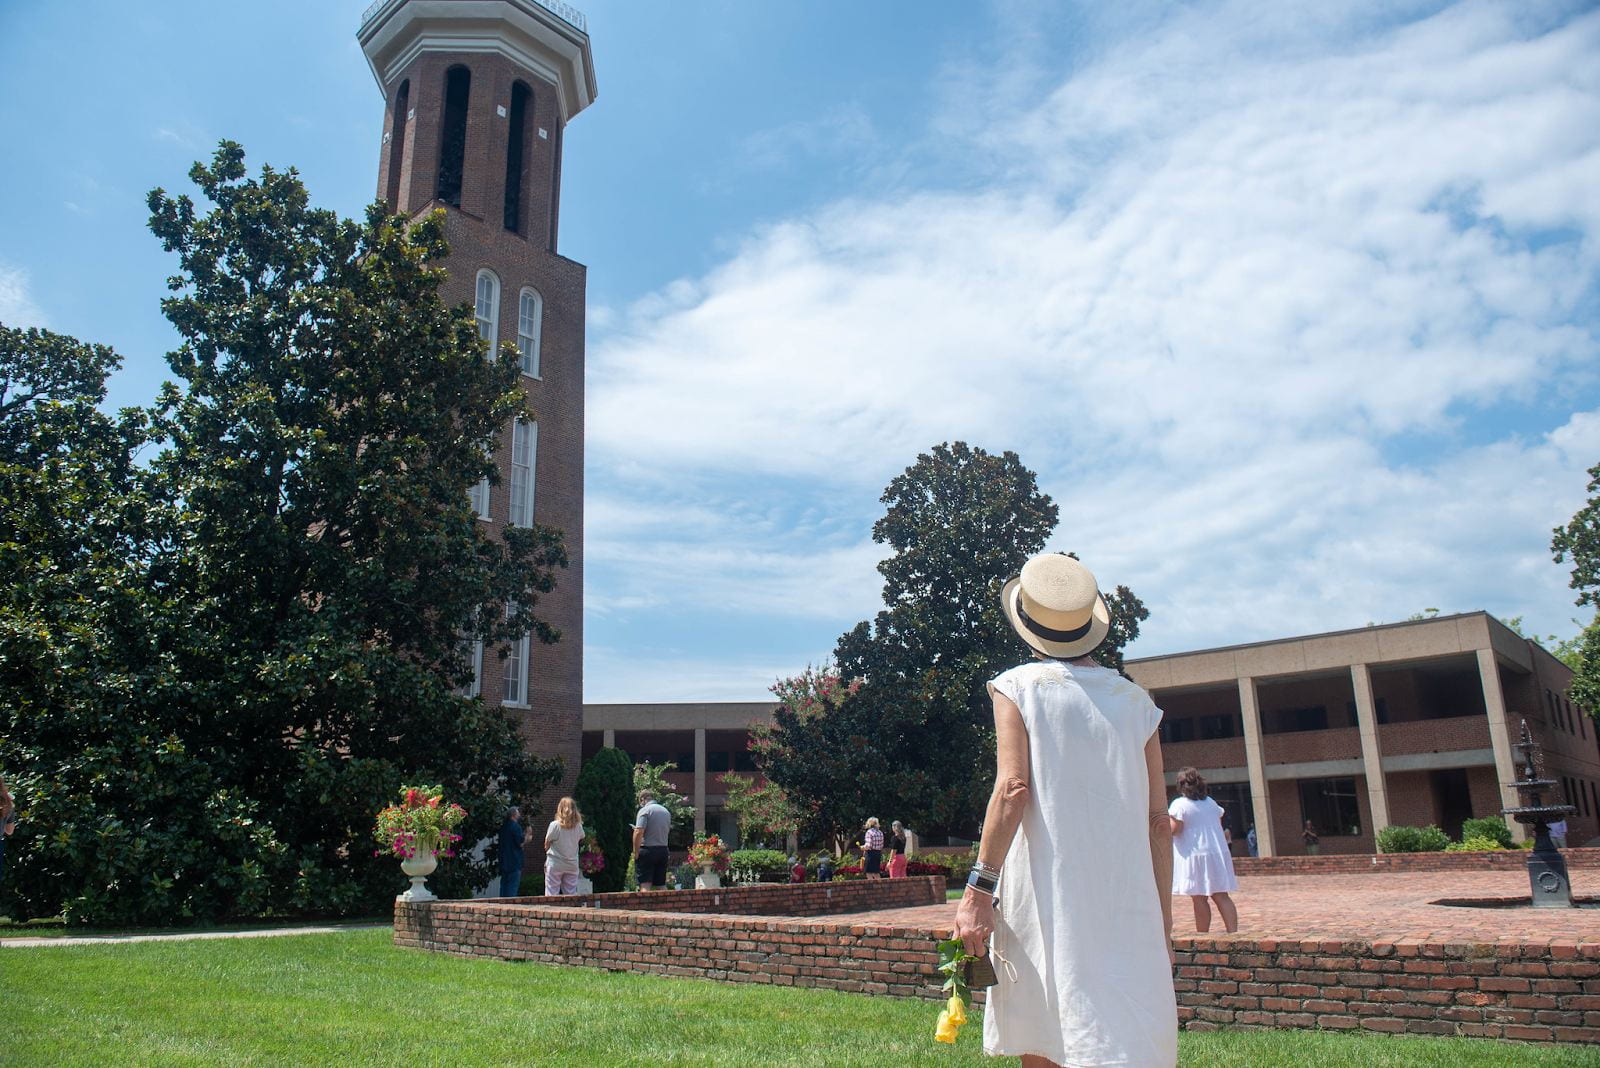 Woman stands outside facing the Bell Tower